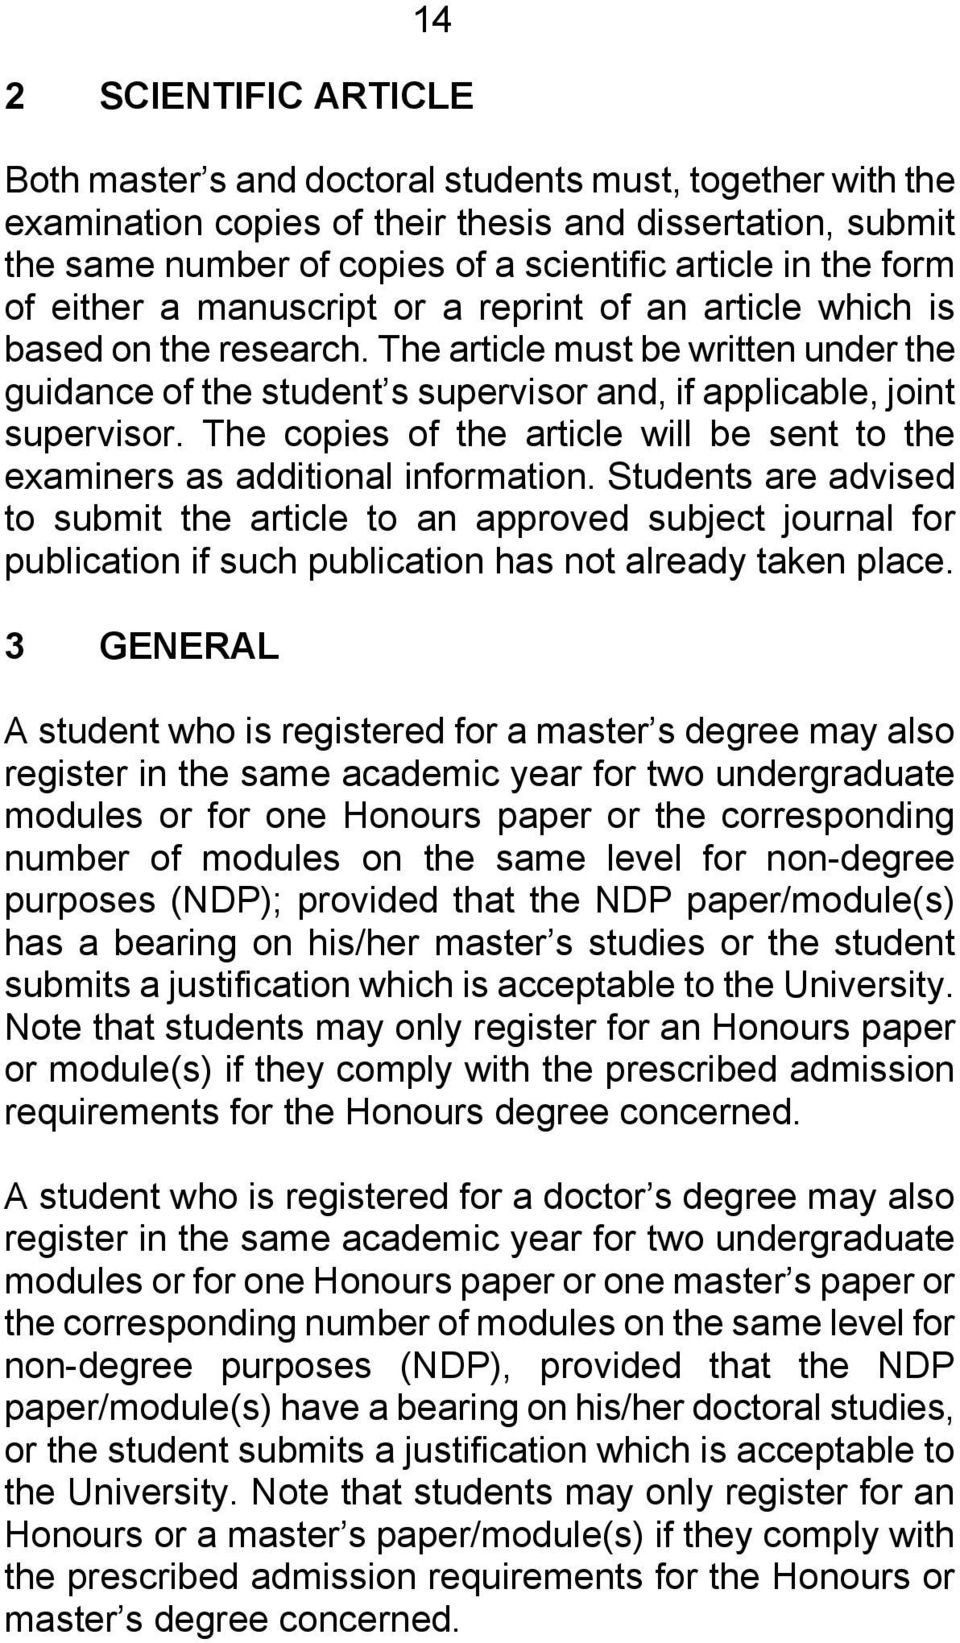 The article must be written under the guidance of the student s supervisor and, if applicable, joint supervisor. The copies of the article will be sent to the examiners as additional information.